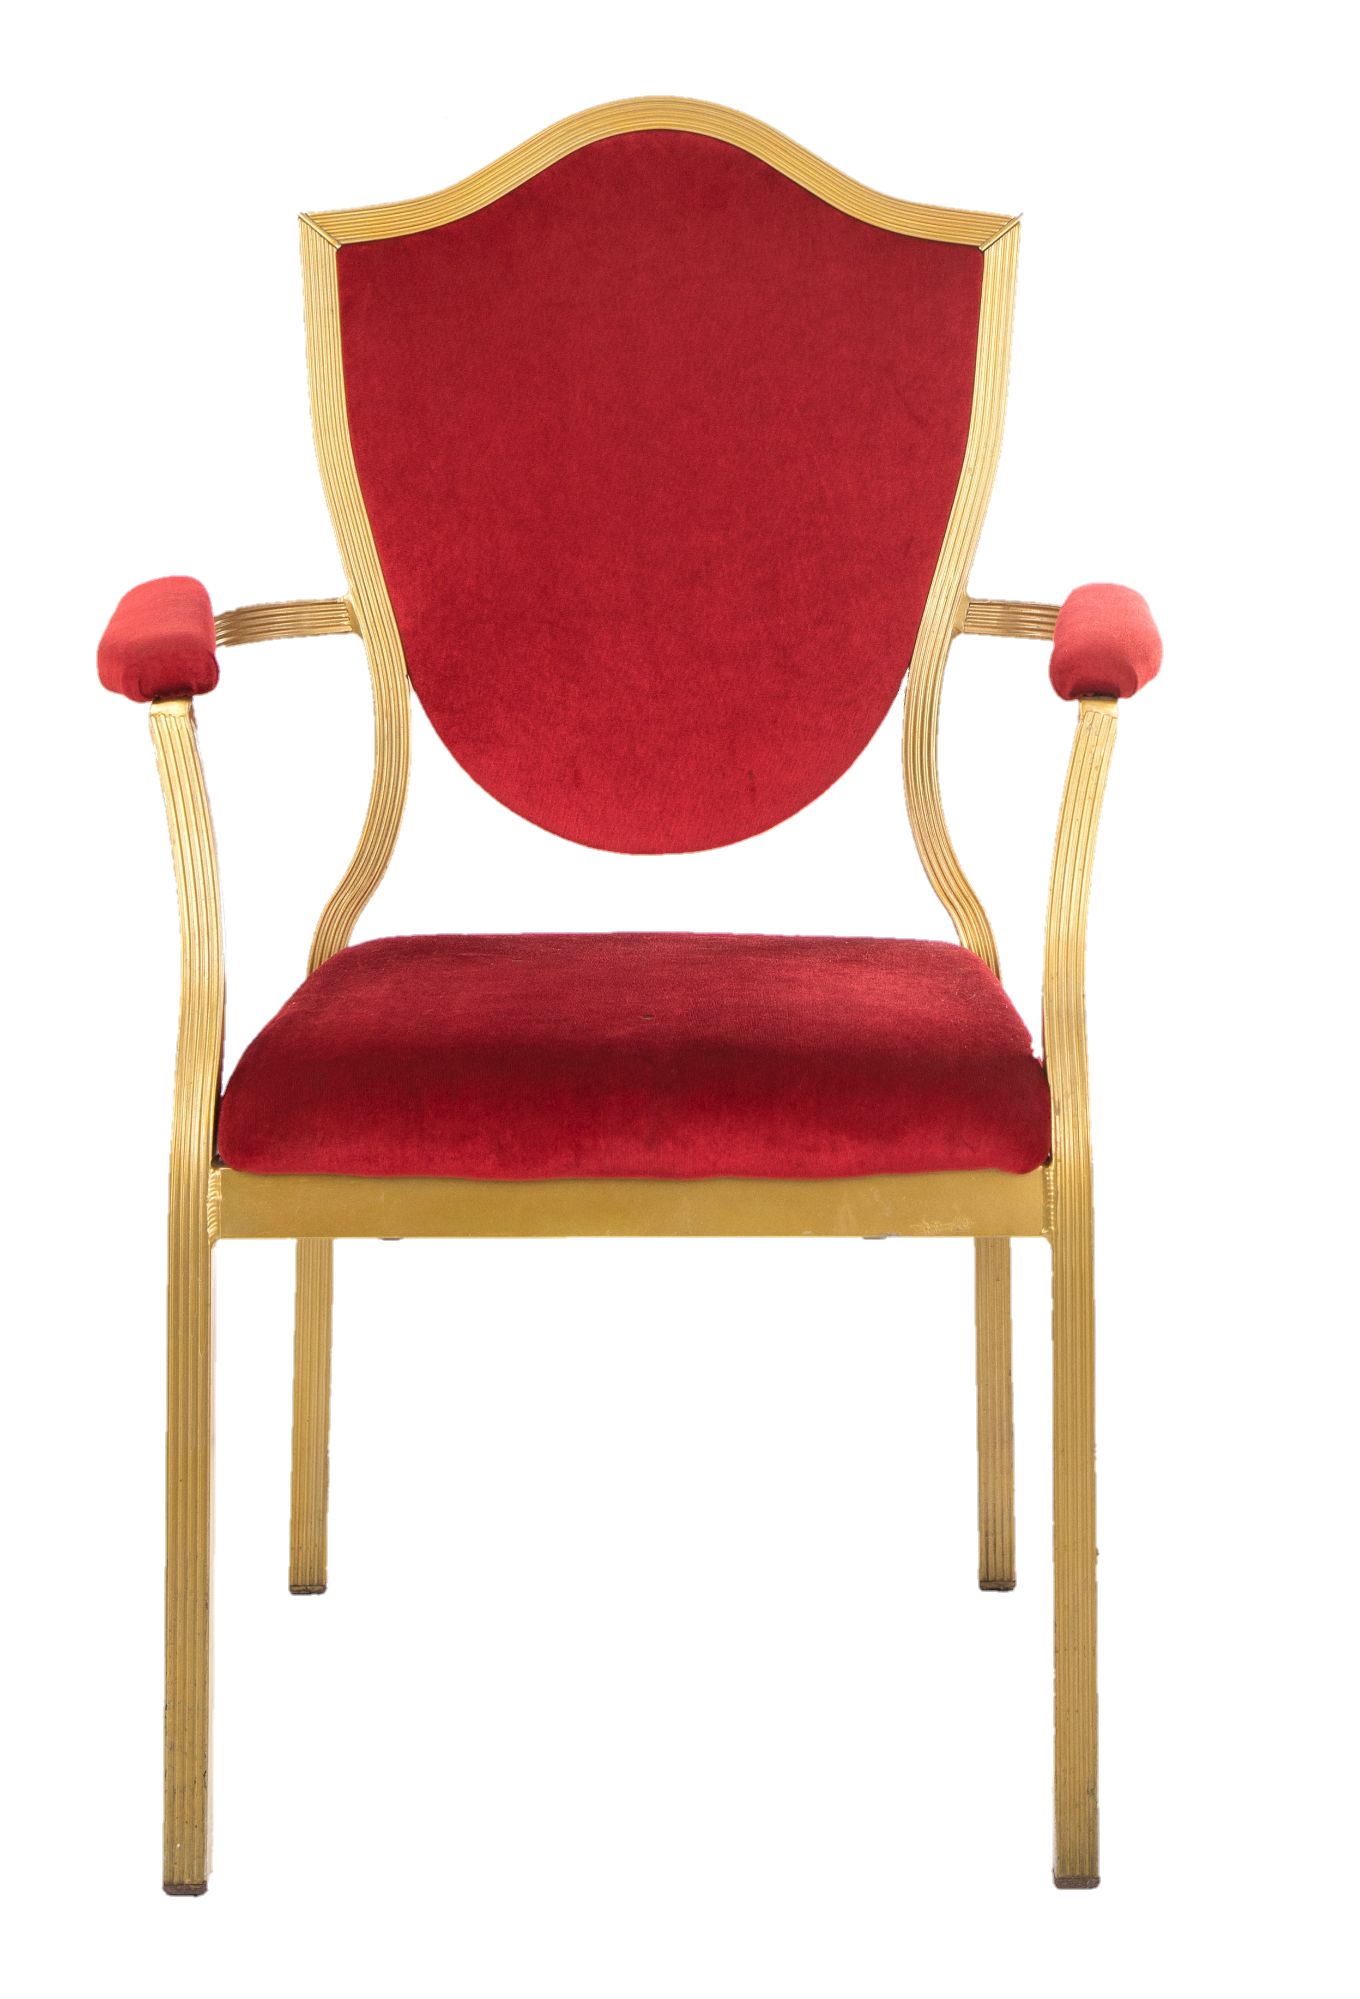 chair-png-image-pngfre-3